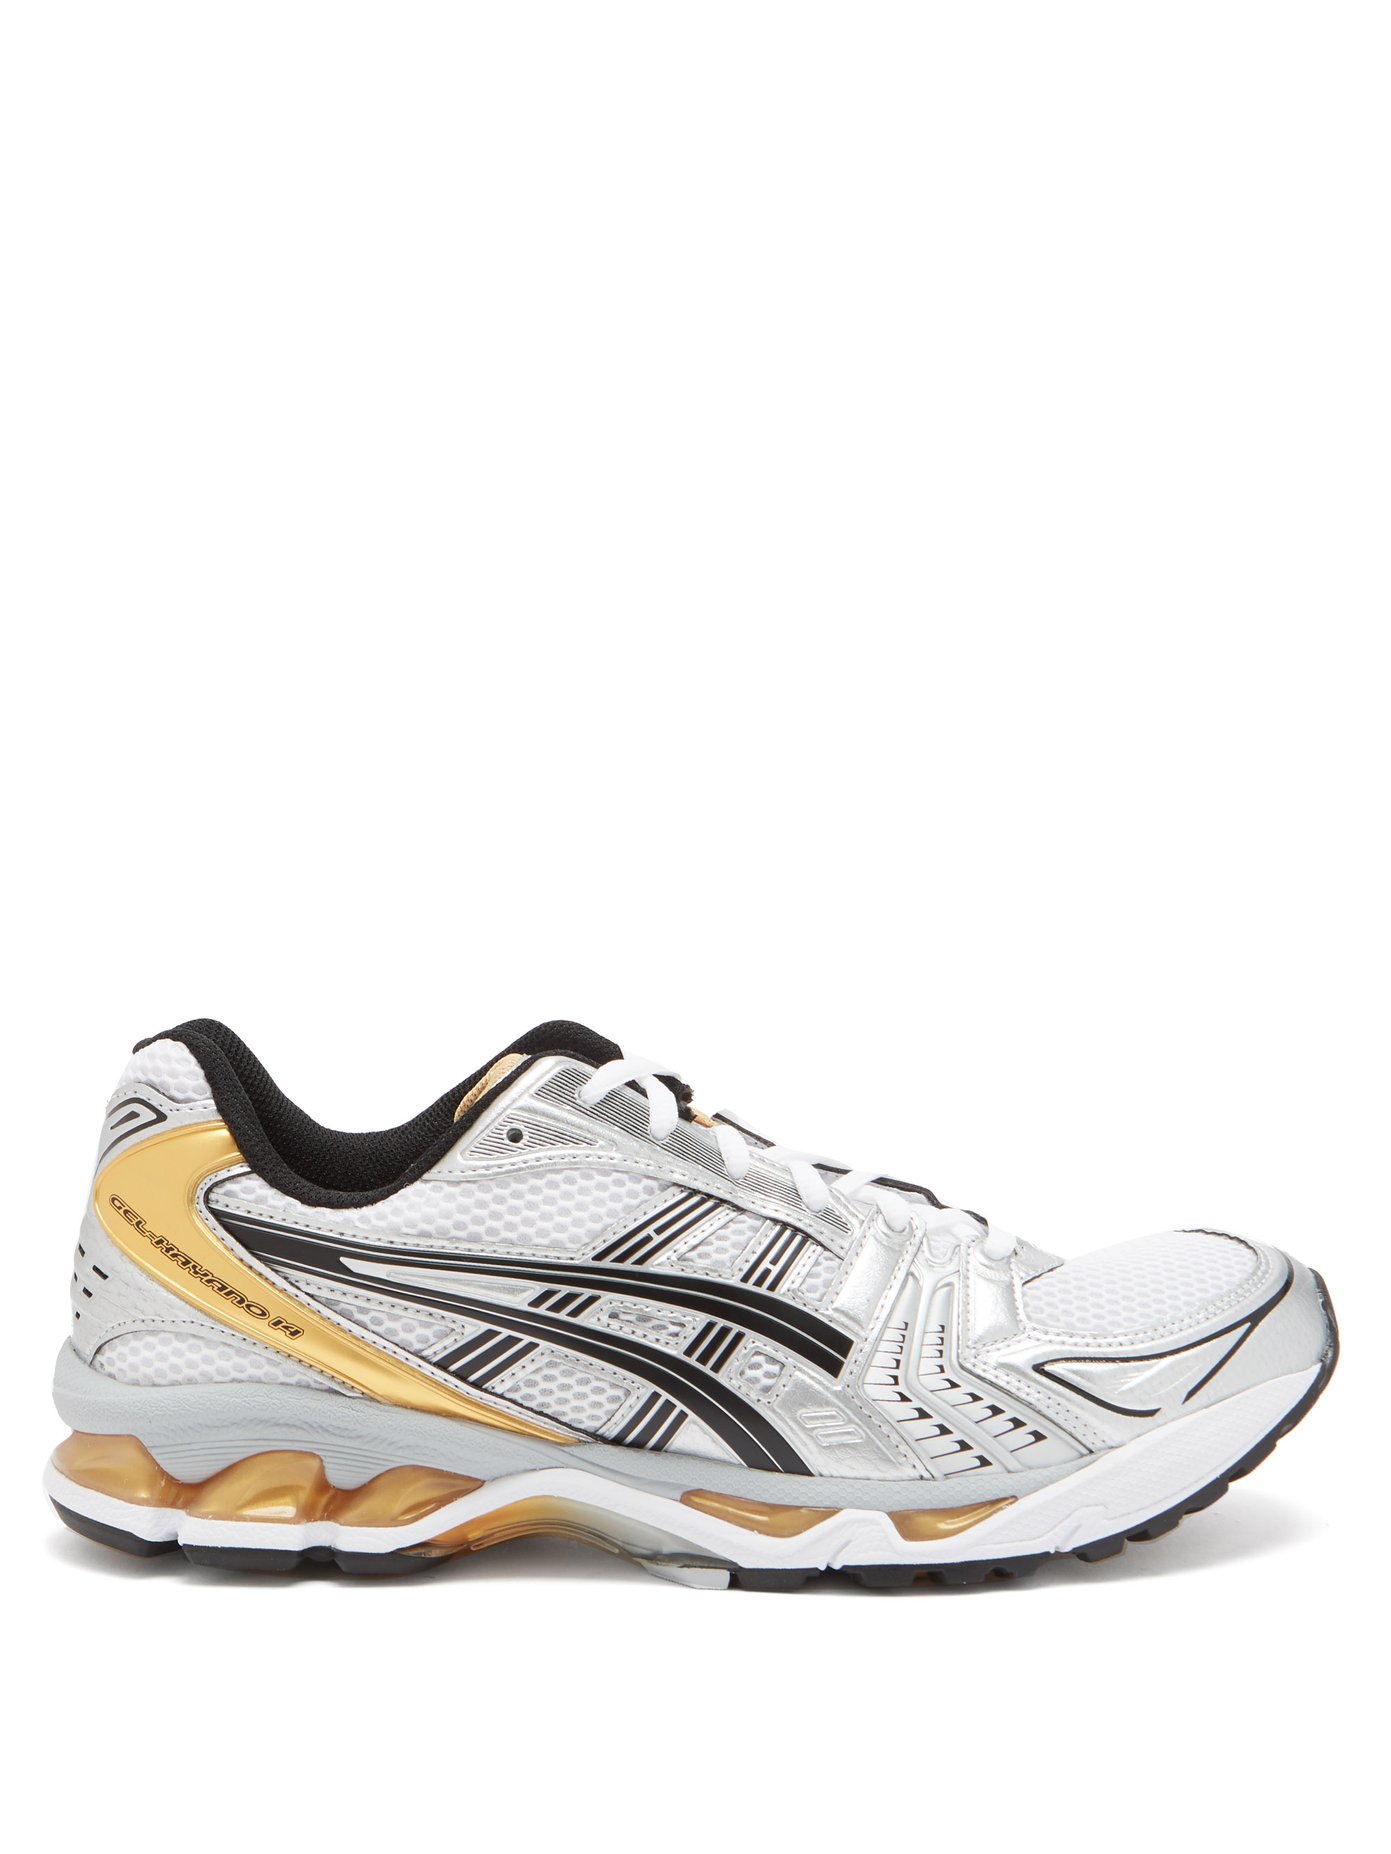 where to buy asics trainers